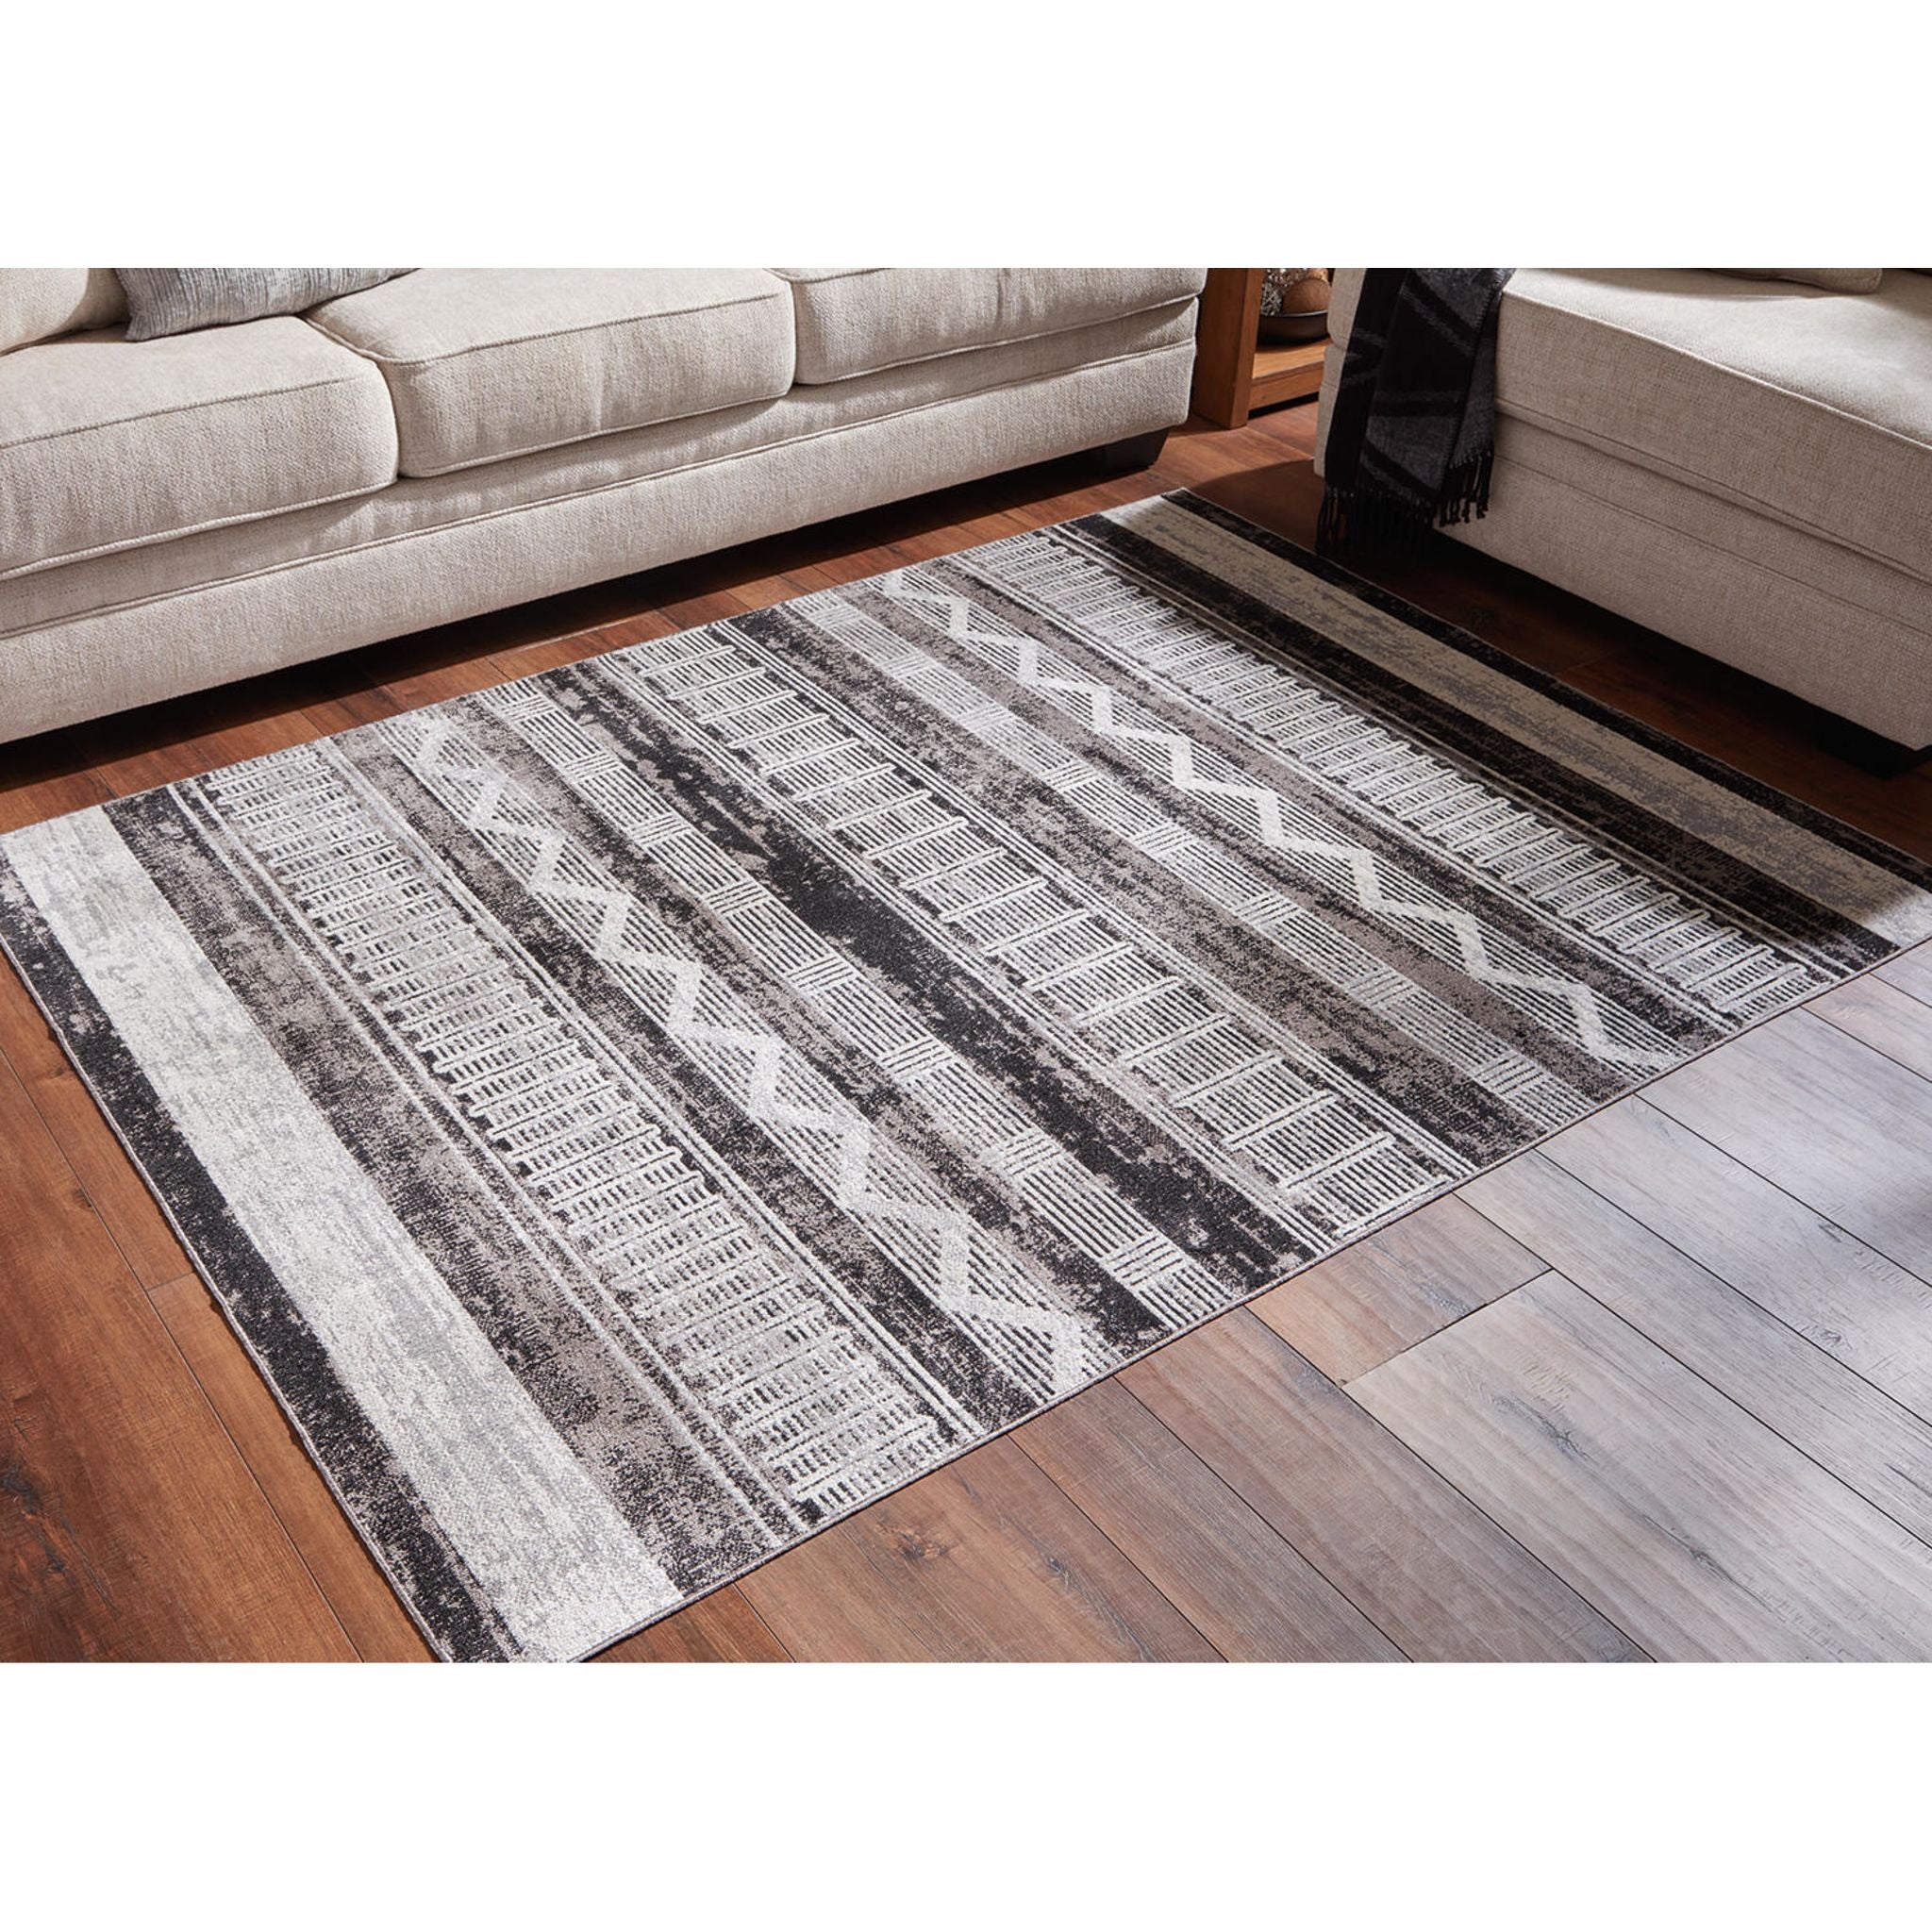 Henchester Area Rug - 8'x10'